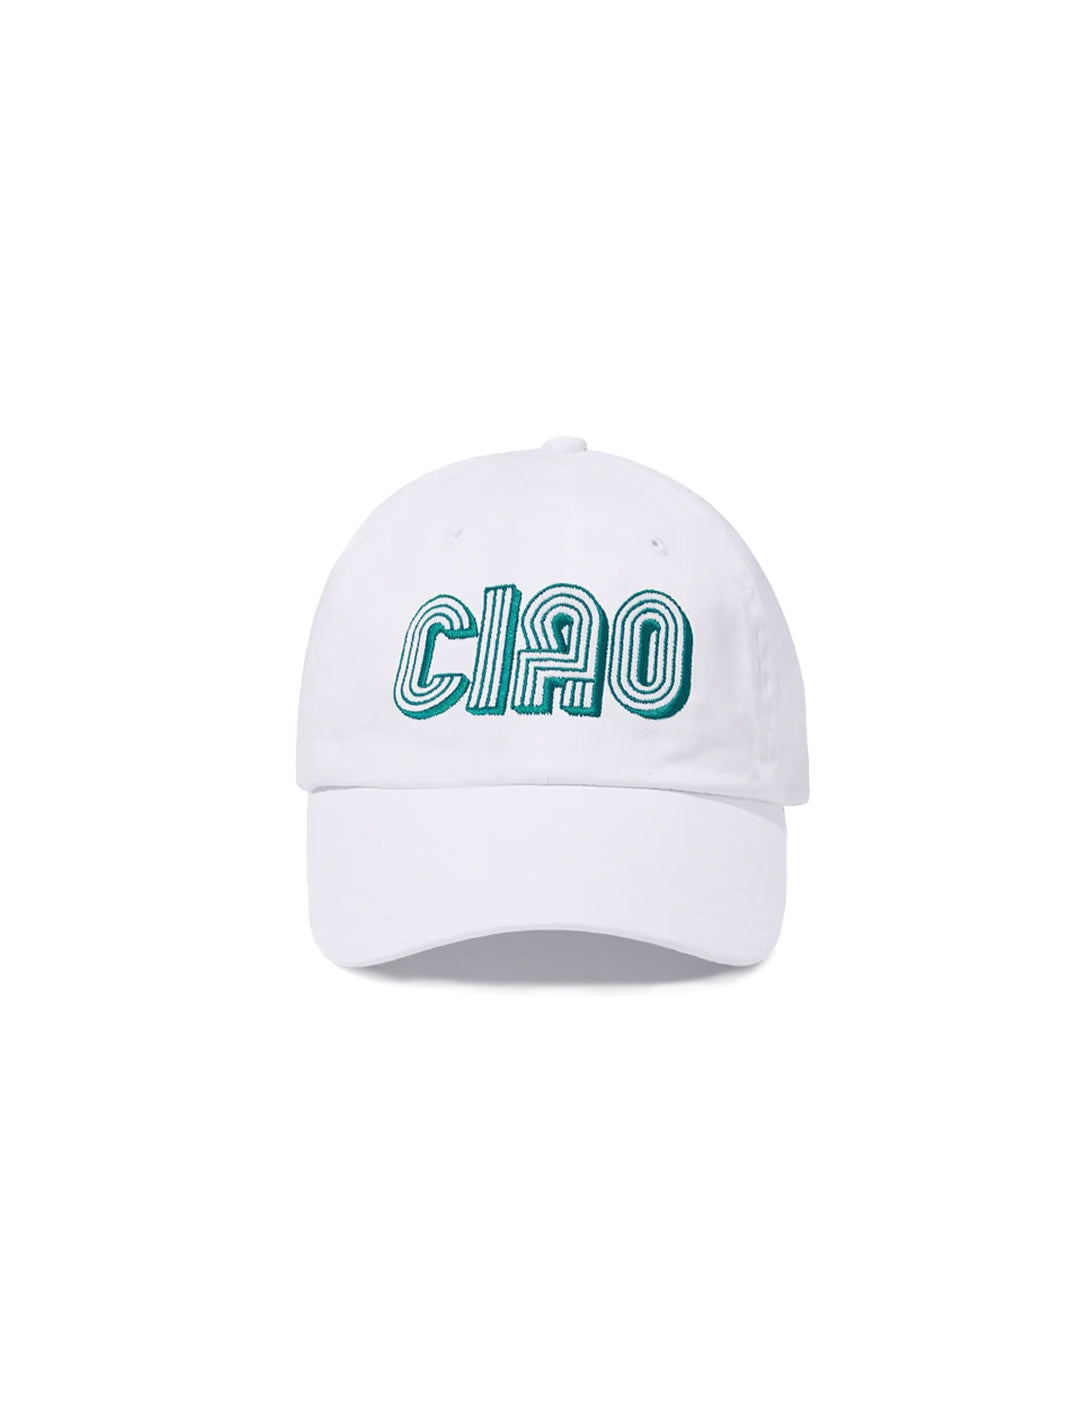 Front view of KULE's the CIAO kap in white.